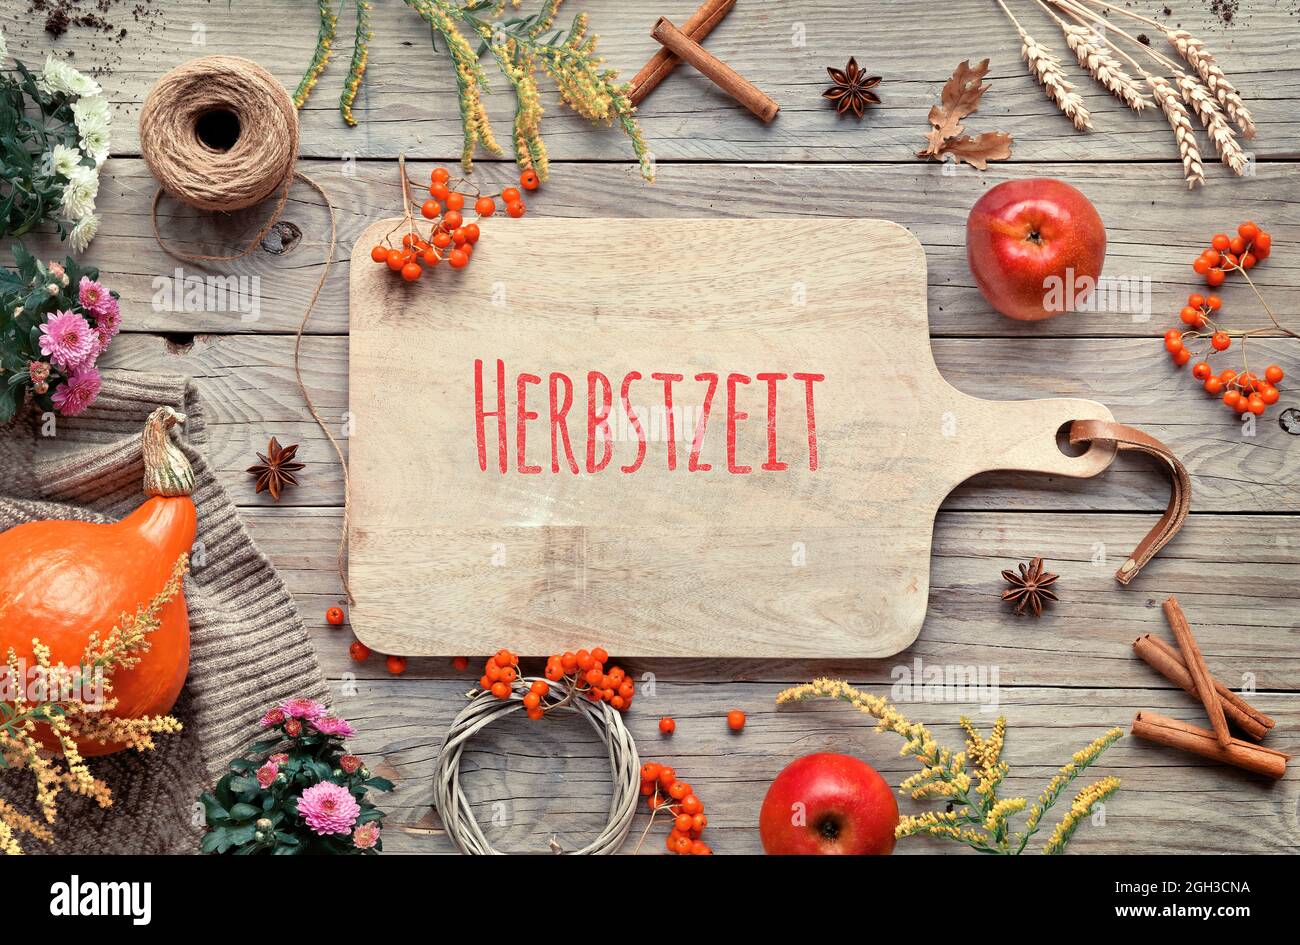 Text Herbstzeit on cutting board means Autumn in German language. Orange pumpkins, rowan berry, apples, cinnamon and frame made from Fall decorations Stock Photo